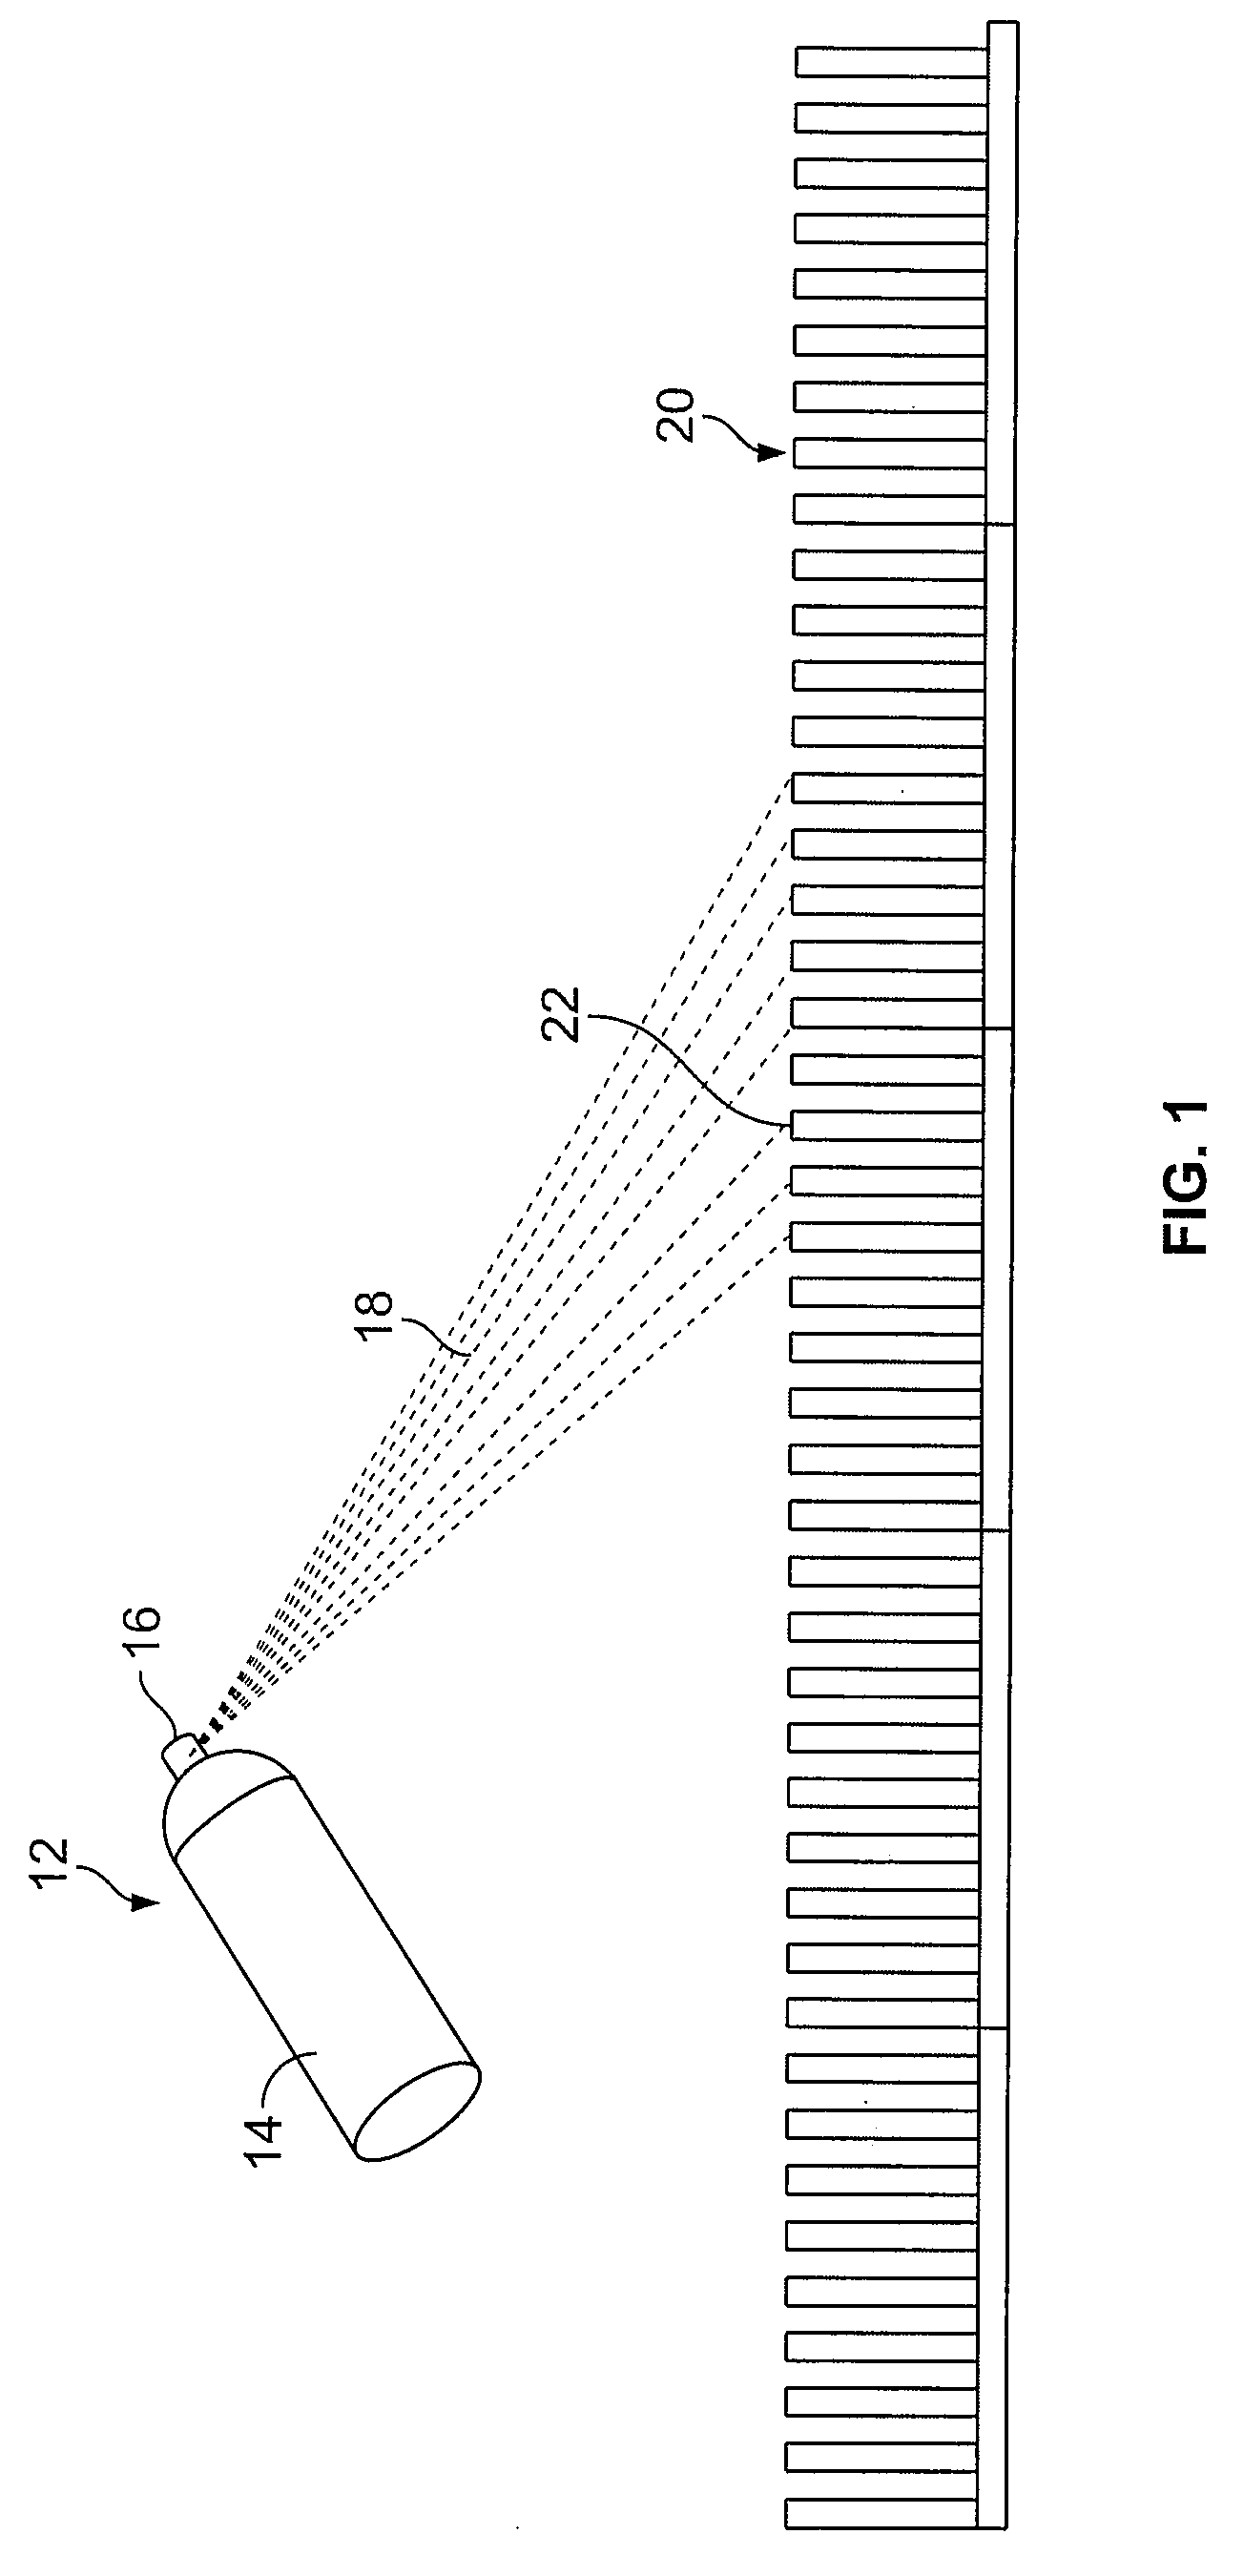 Method of affixing a design to a surface